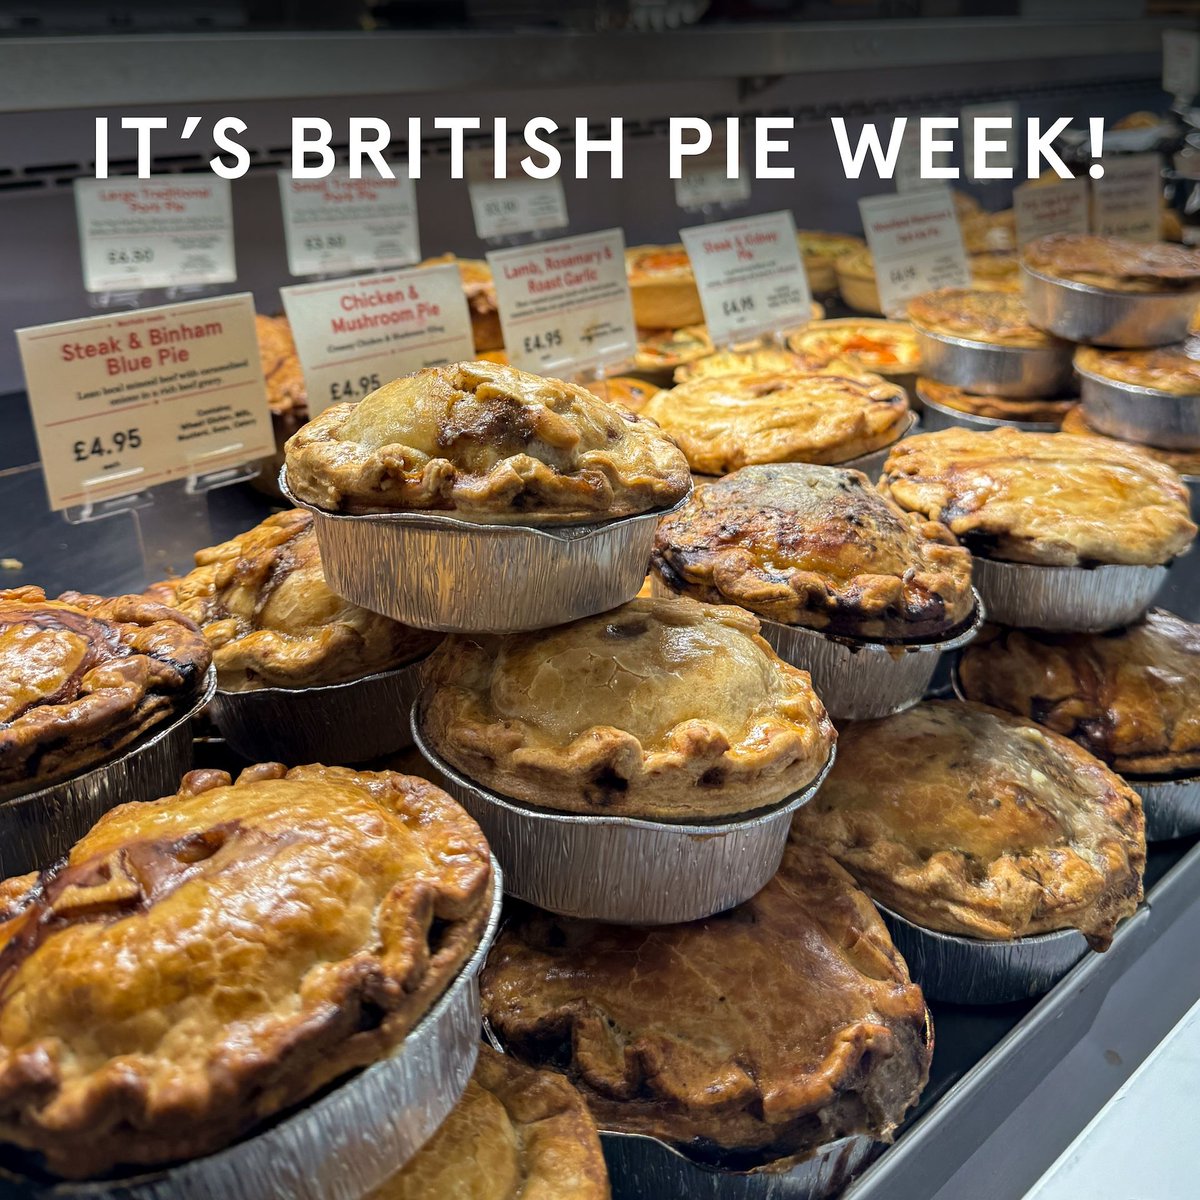 Celebrate British Pie Week with us at Walsingham Farm Shop! Indulge in mouthwatering selection of pies, all available at a special 20% discount until Sunday. Shop online or visit us and treat yourself today! #BritishPieWeek